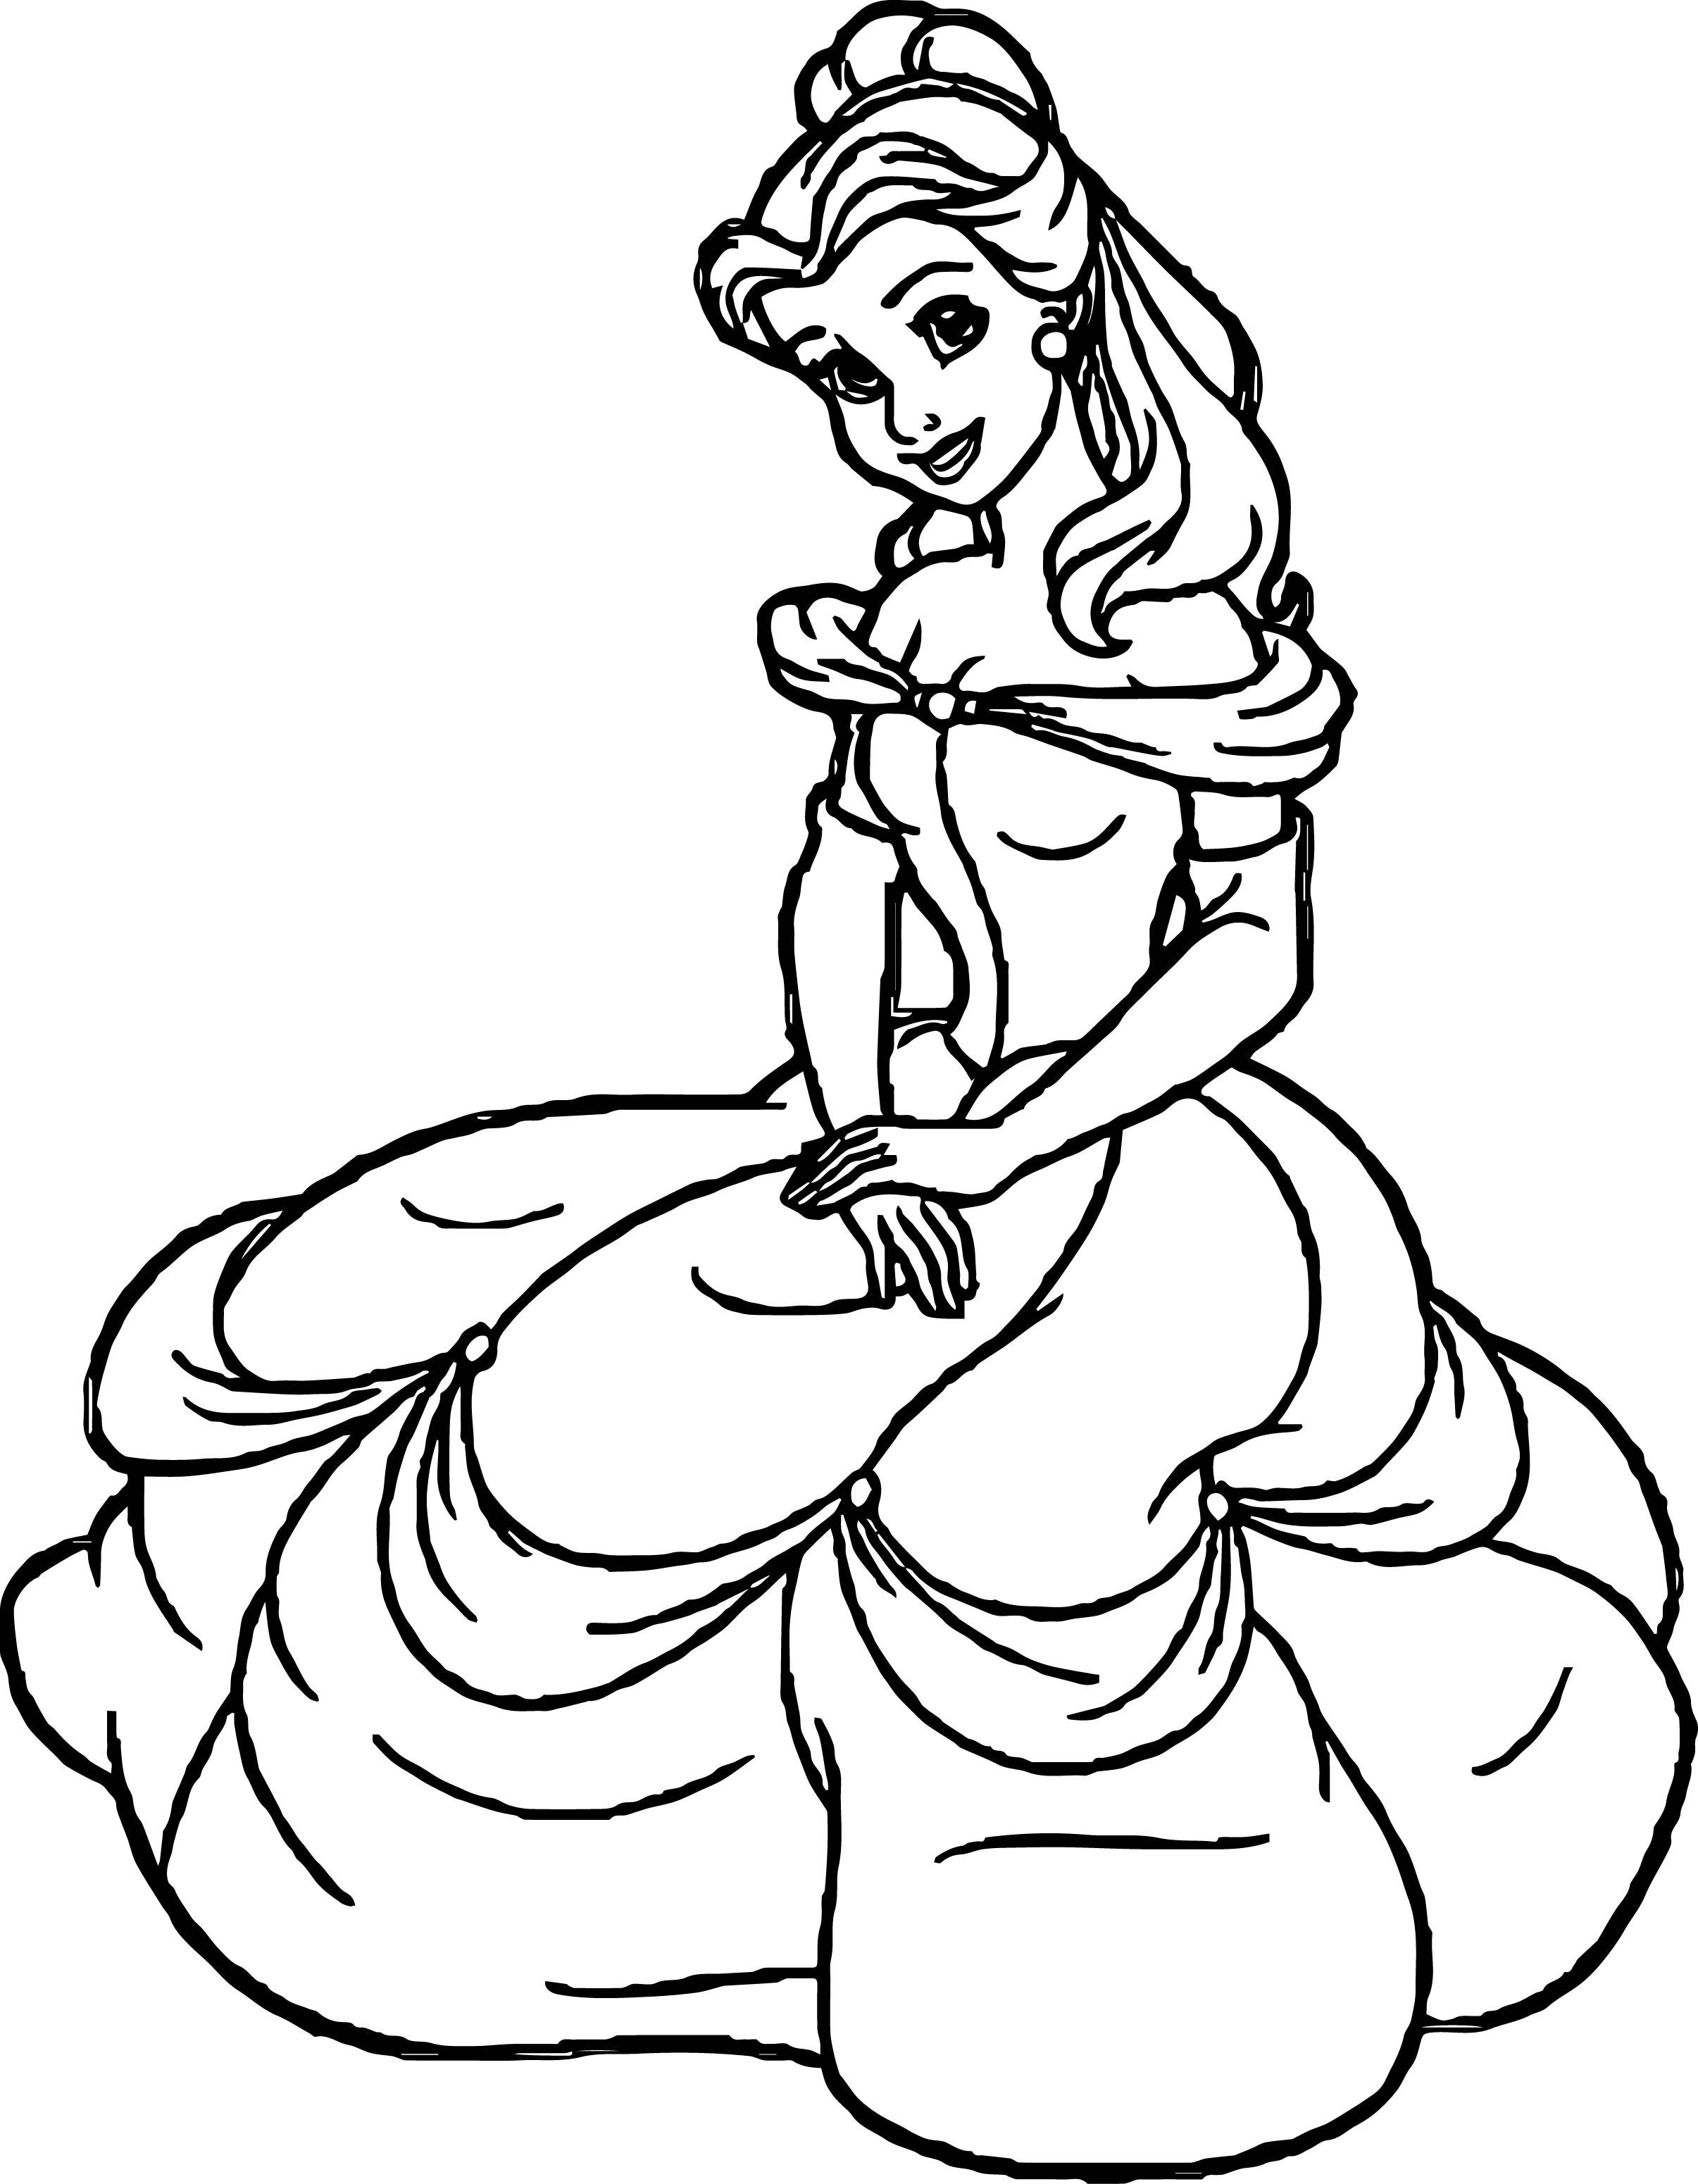 Disney Princess Coloring Pages Easy Wallpaper